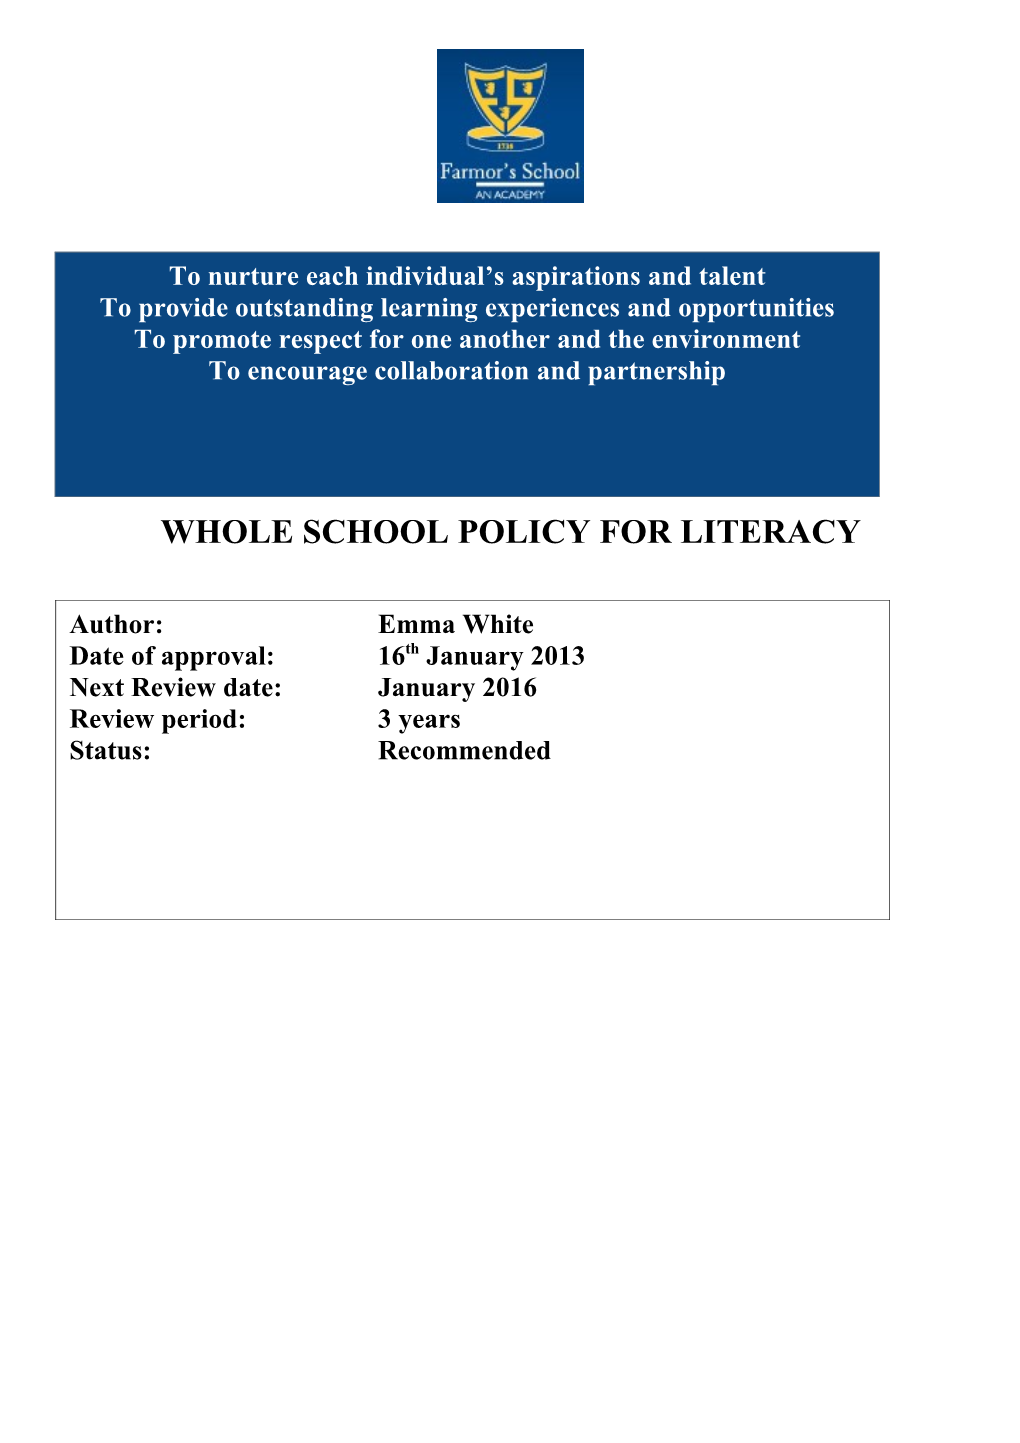 Whole School Policy for Literacy